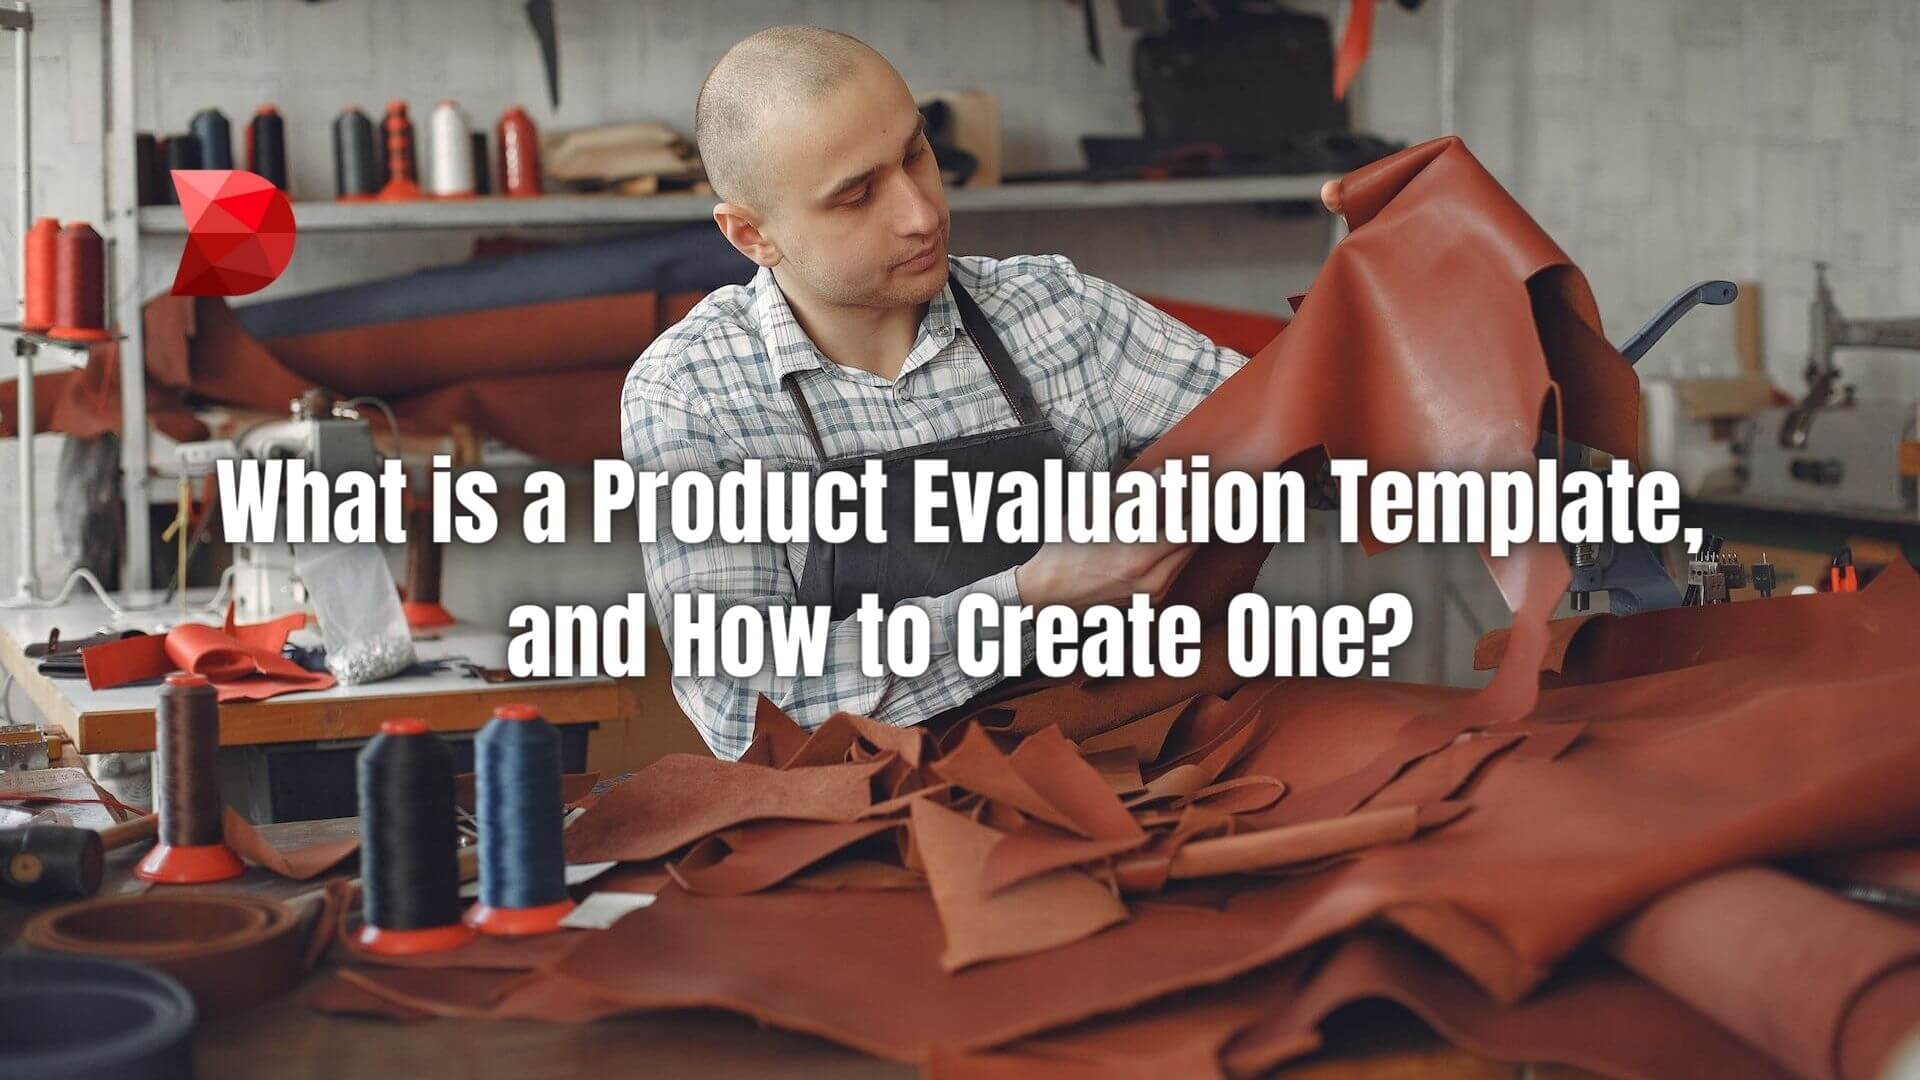 Elevate your decision-making process. Click here to learn how to design a powerful product evaluation template with our step-by-step guide.